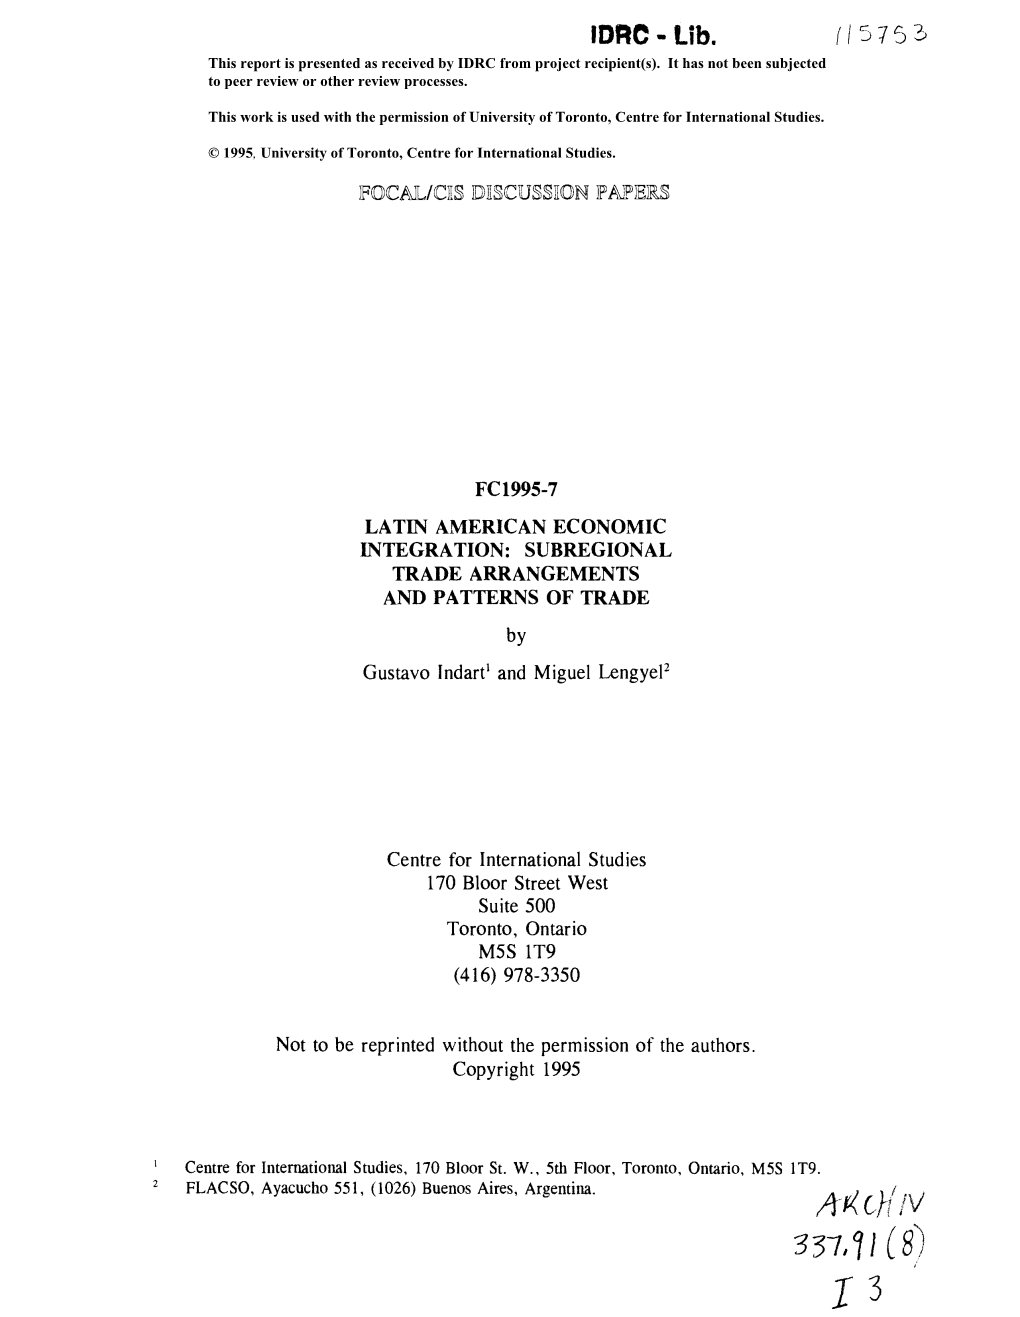 LATIN AMERICAN ECONOMIC INTEGRATION: SUBREGIONAL TRADE ARRANGEMENTS and PATTERNS of TRADE by Gustavo Indart' and Miguel Lengyel2